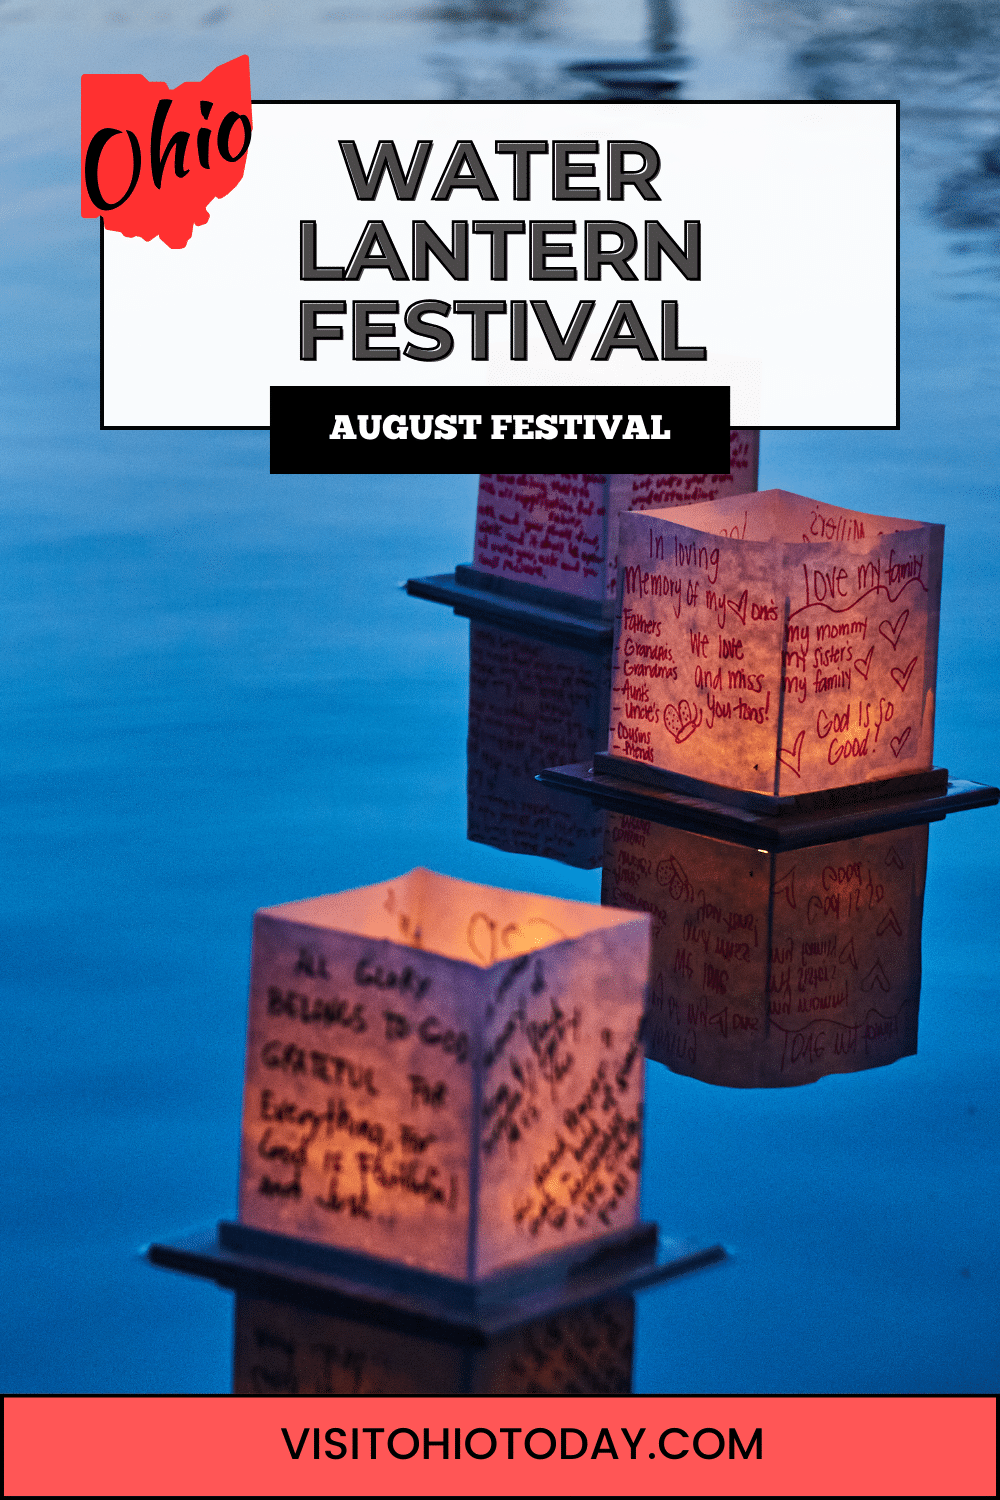 The Water Lantern Festival in mid-August in Columbus is a peaceful event celebrating life, featuring the release of paper lanterns onto the water.